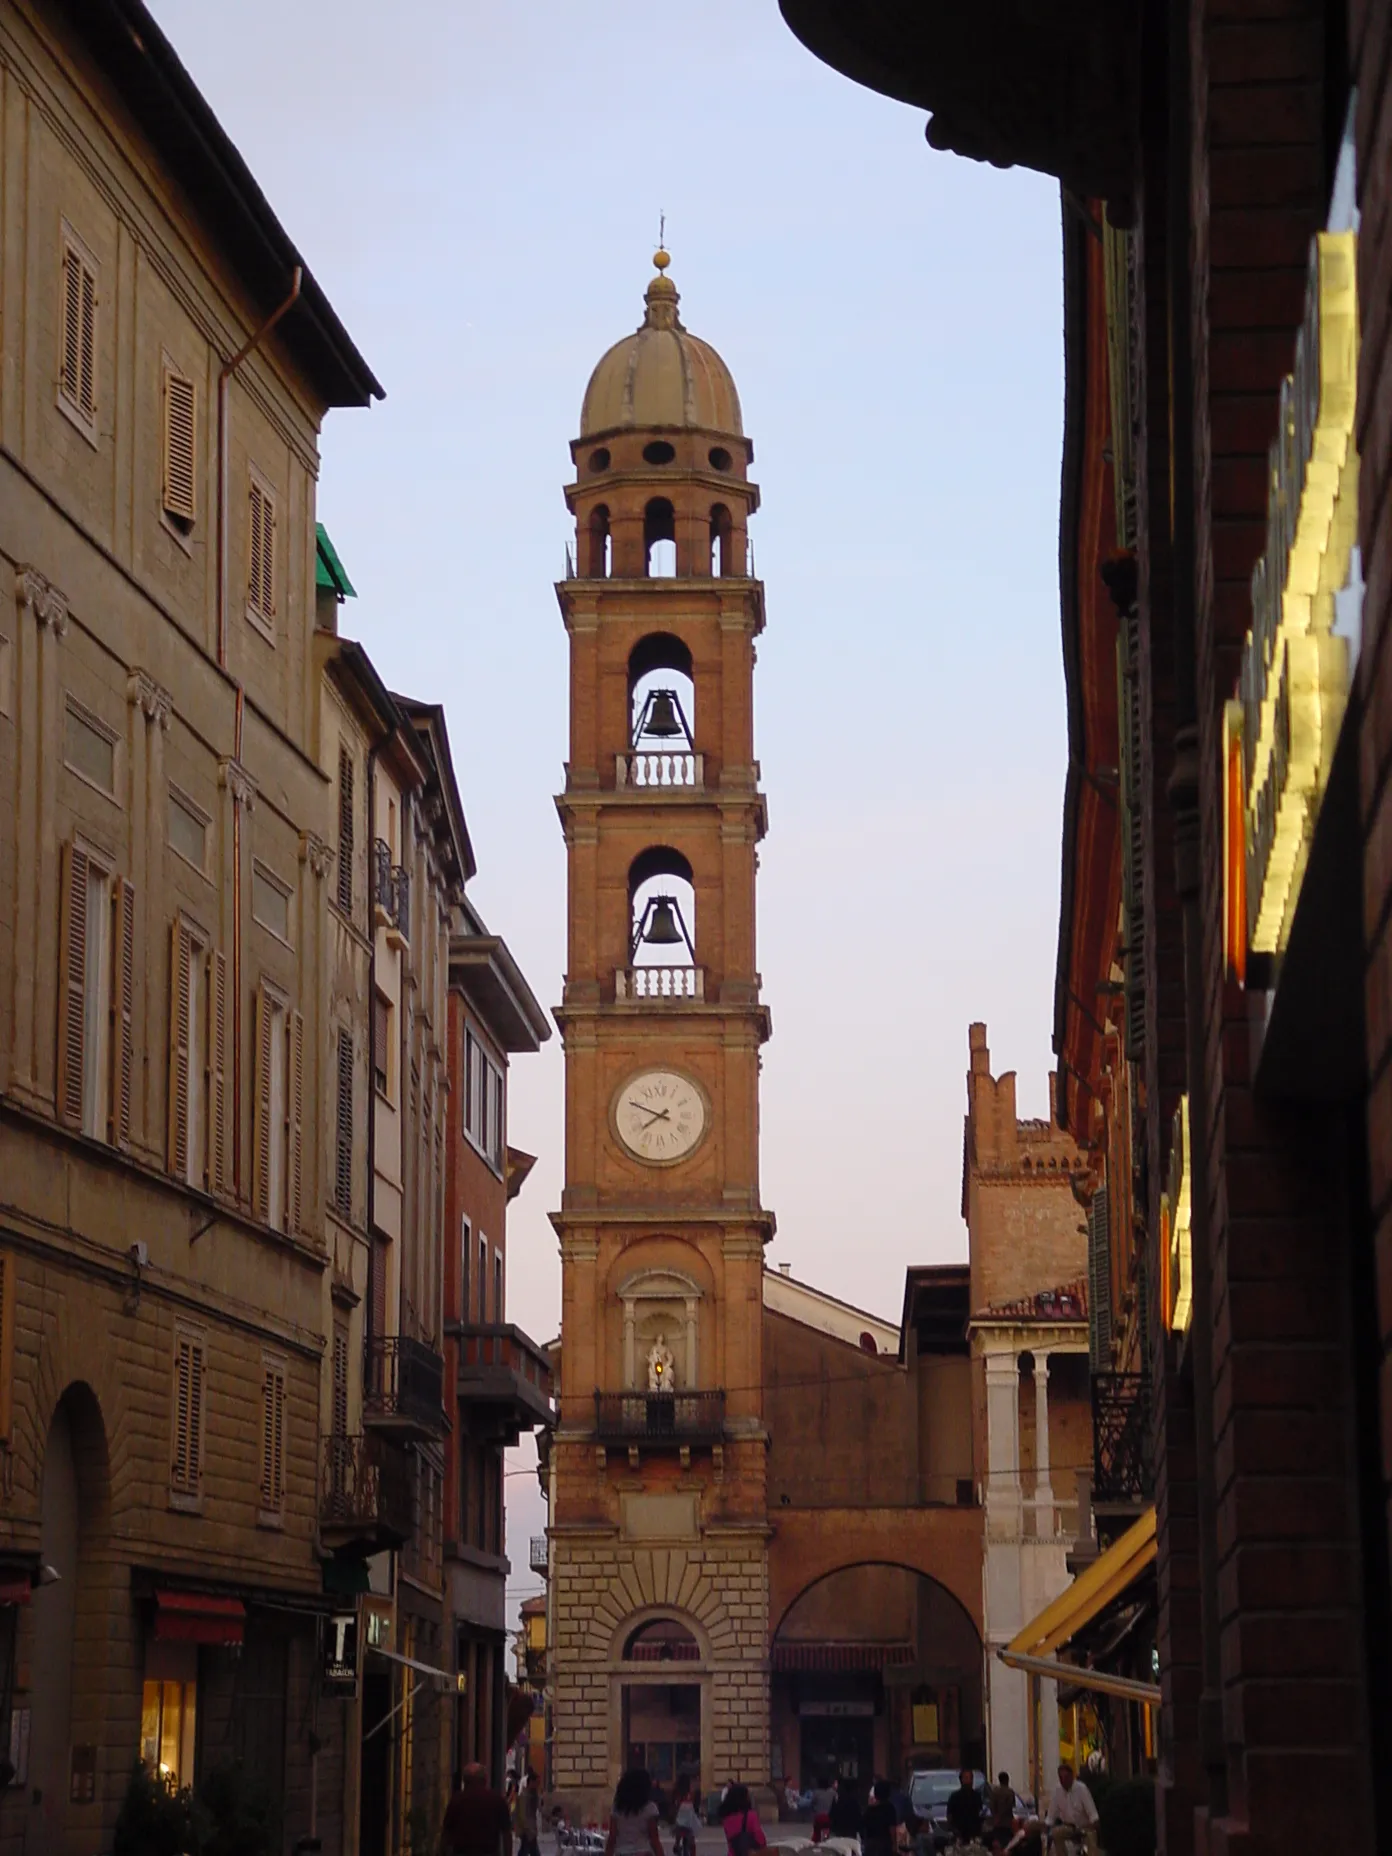 Photo showing: Own work - separate belltower in the heart of Faenza (Italy).

Use only with contribution to 'Axel Hammer'.